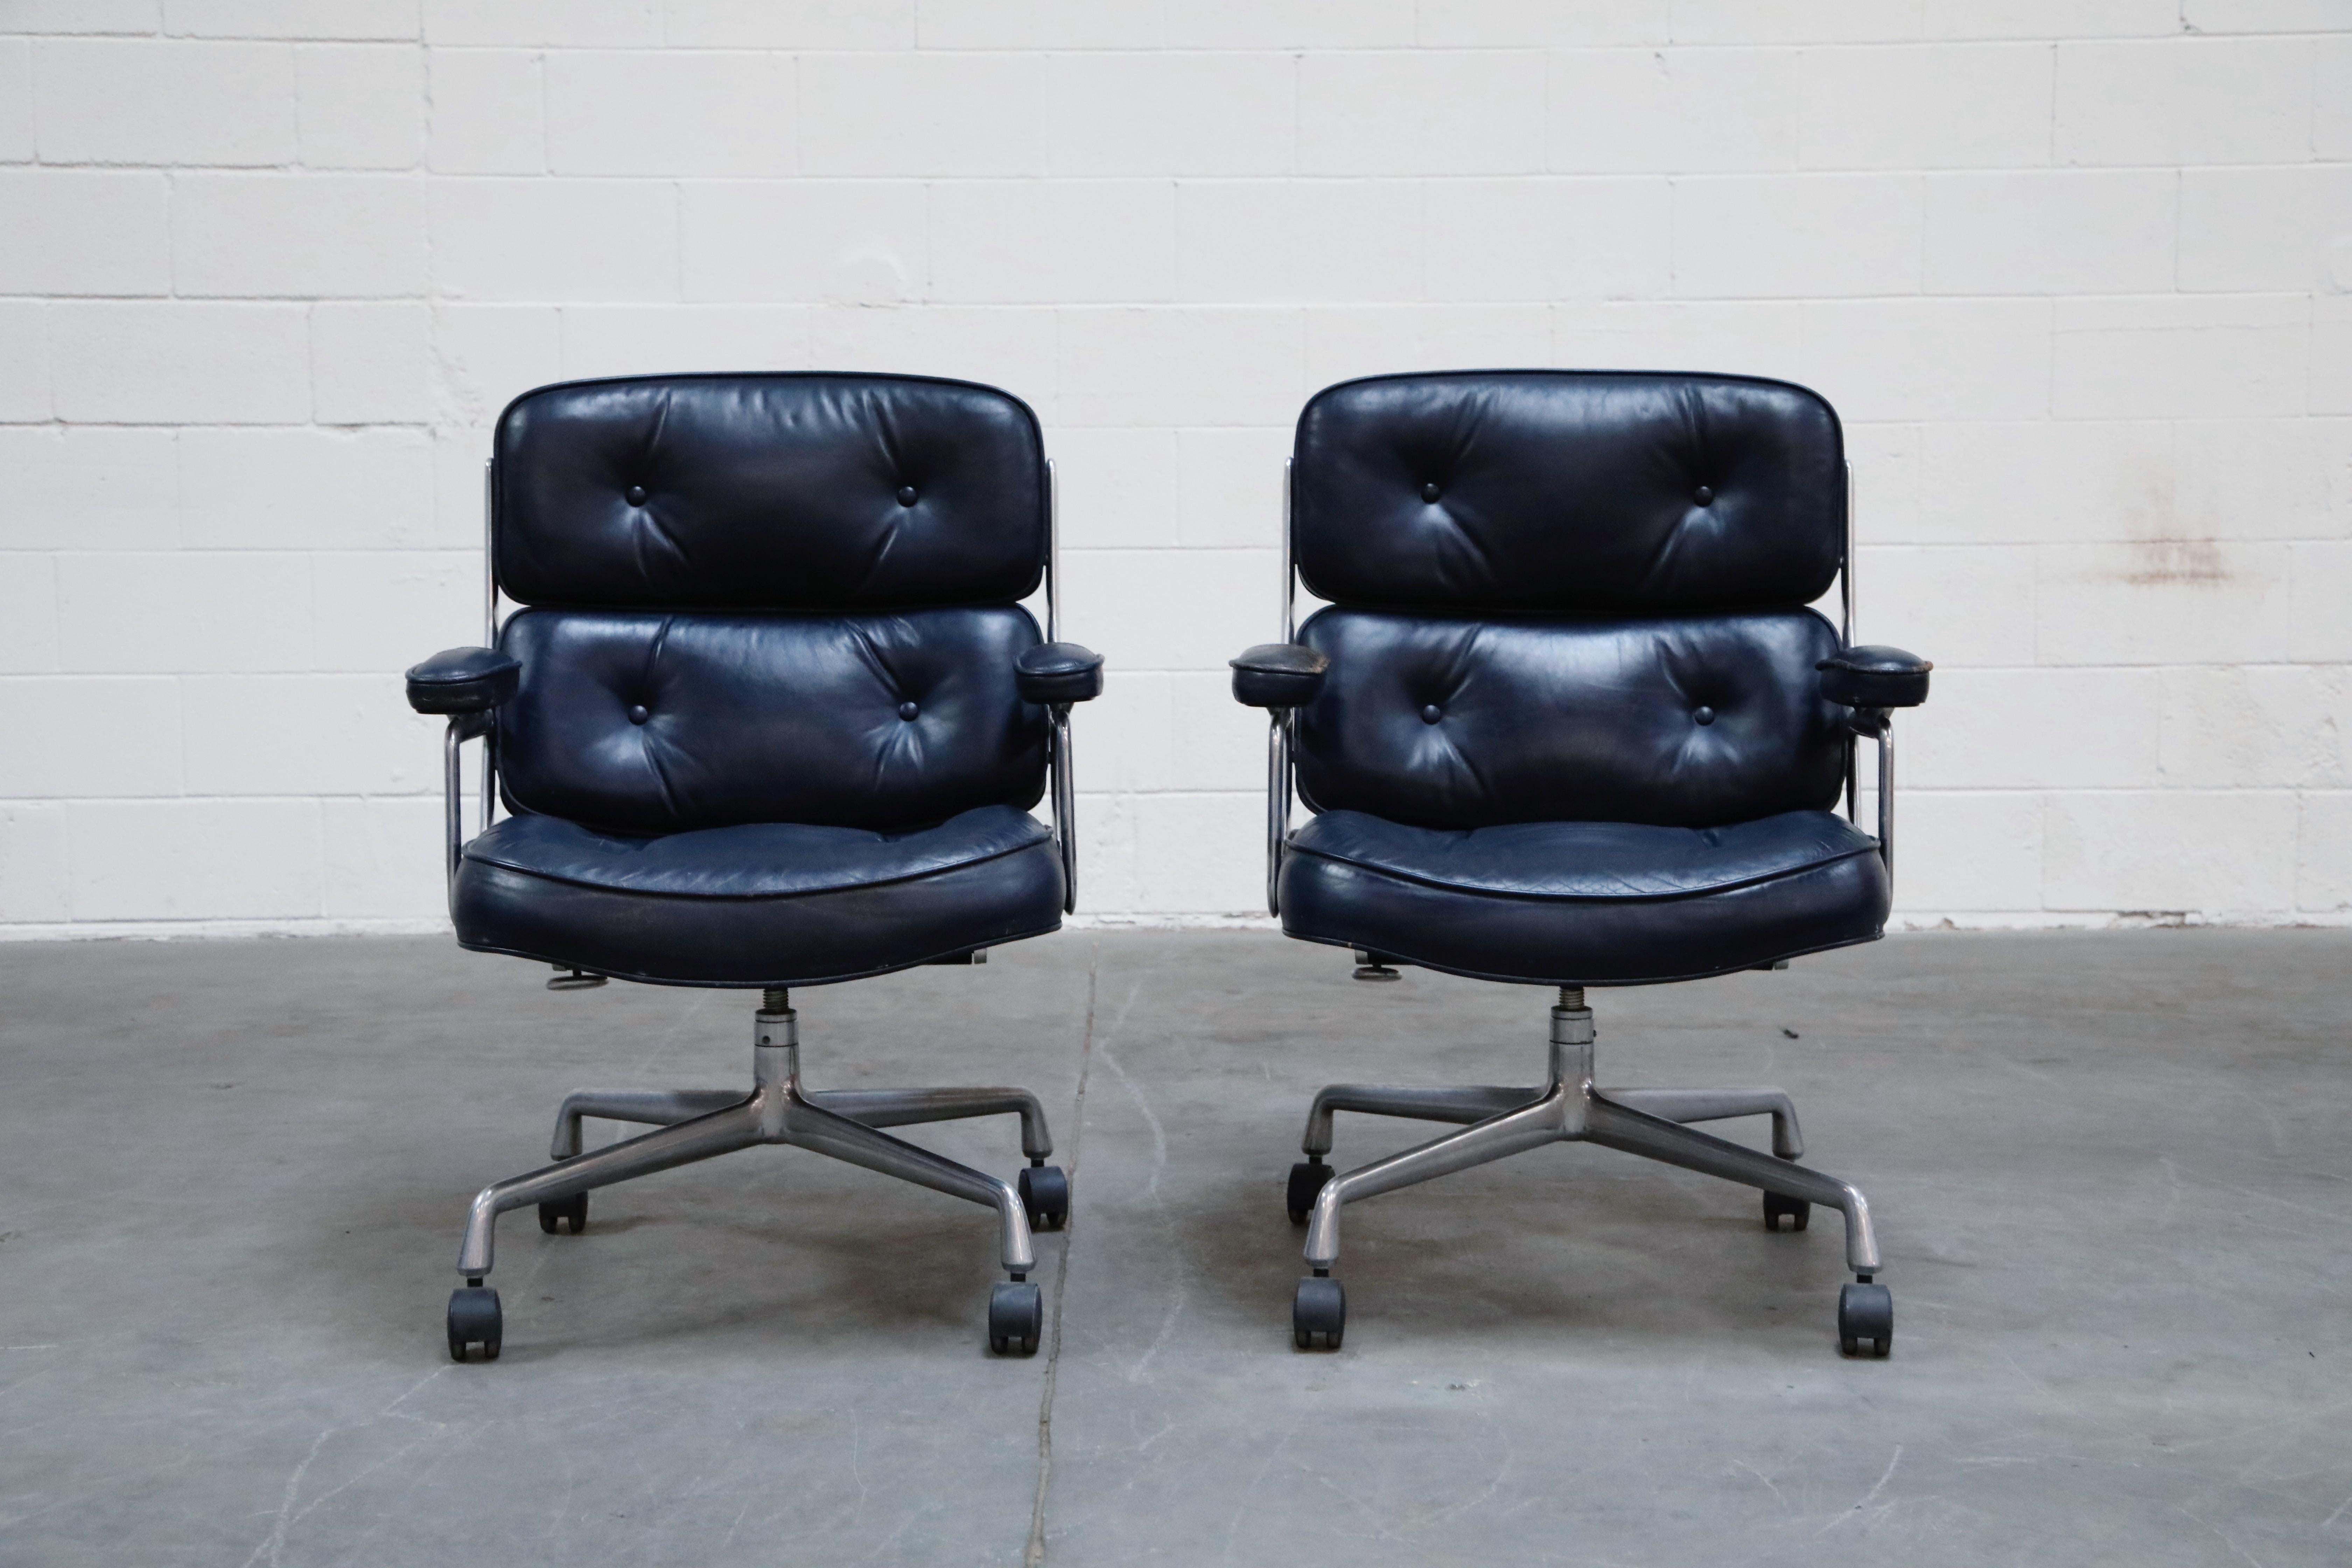 This wonderful pair of very rare color-way blue leather 'Time Life' executive desk chairs was designed by Charles and Ray Eames in 1959 and manufactured by Herman Miller. This set features its original blue colored leather that is attractively